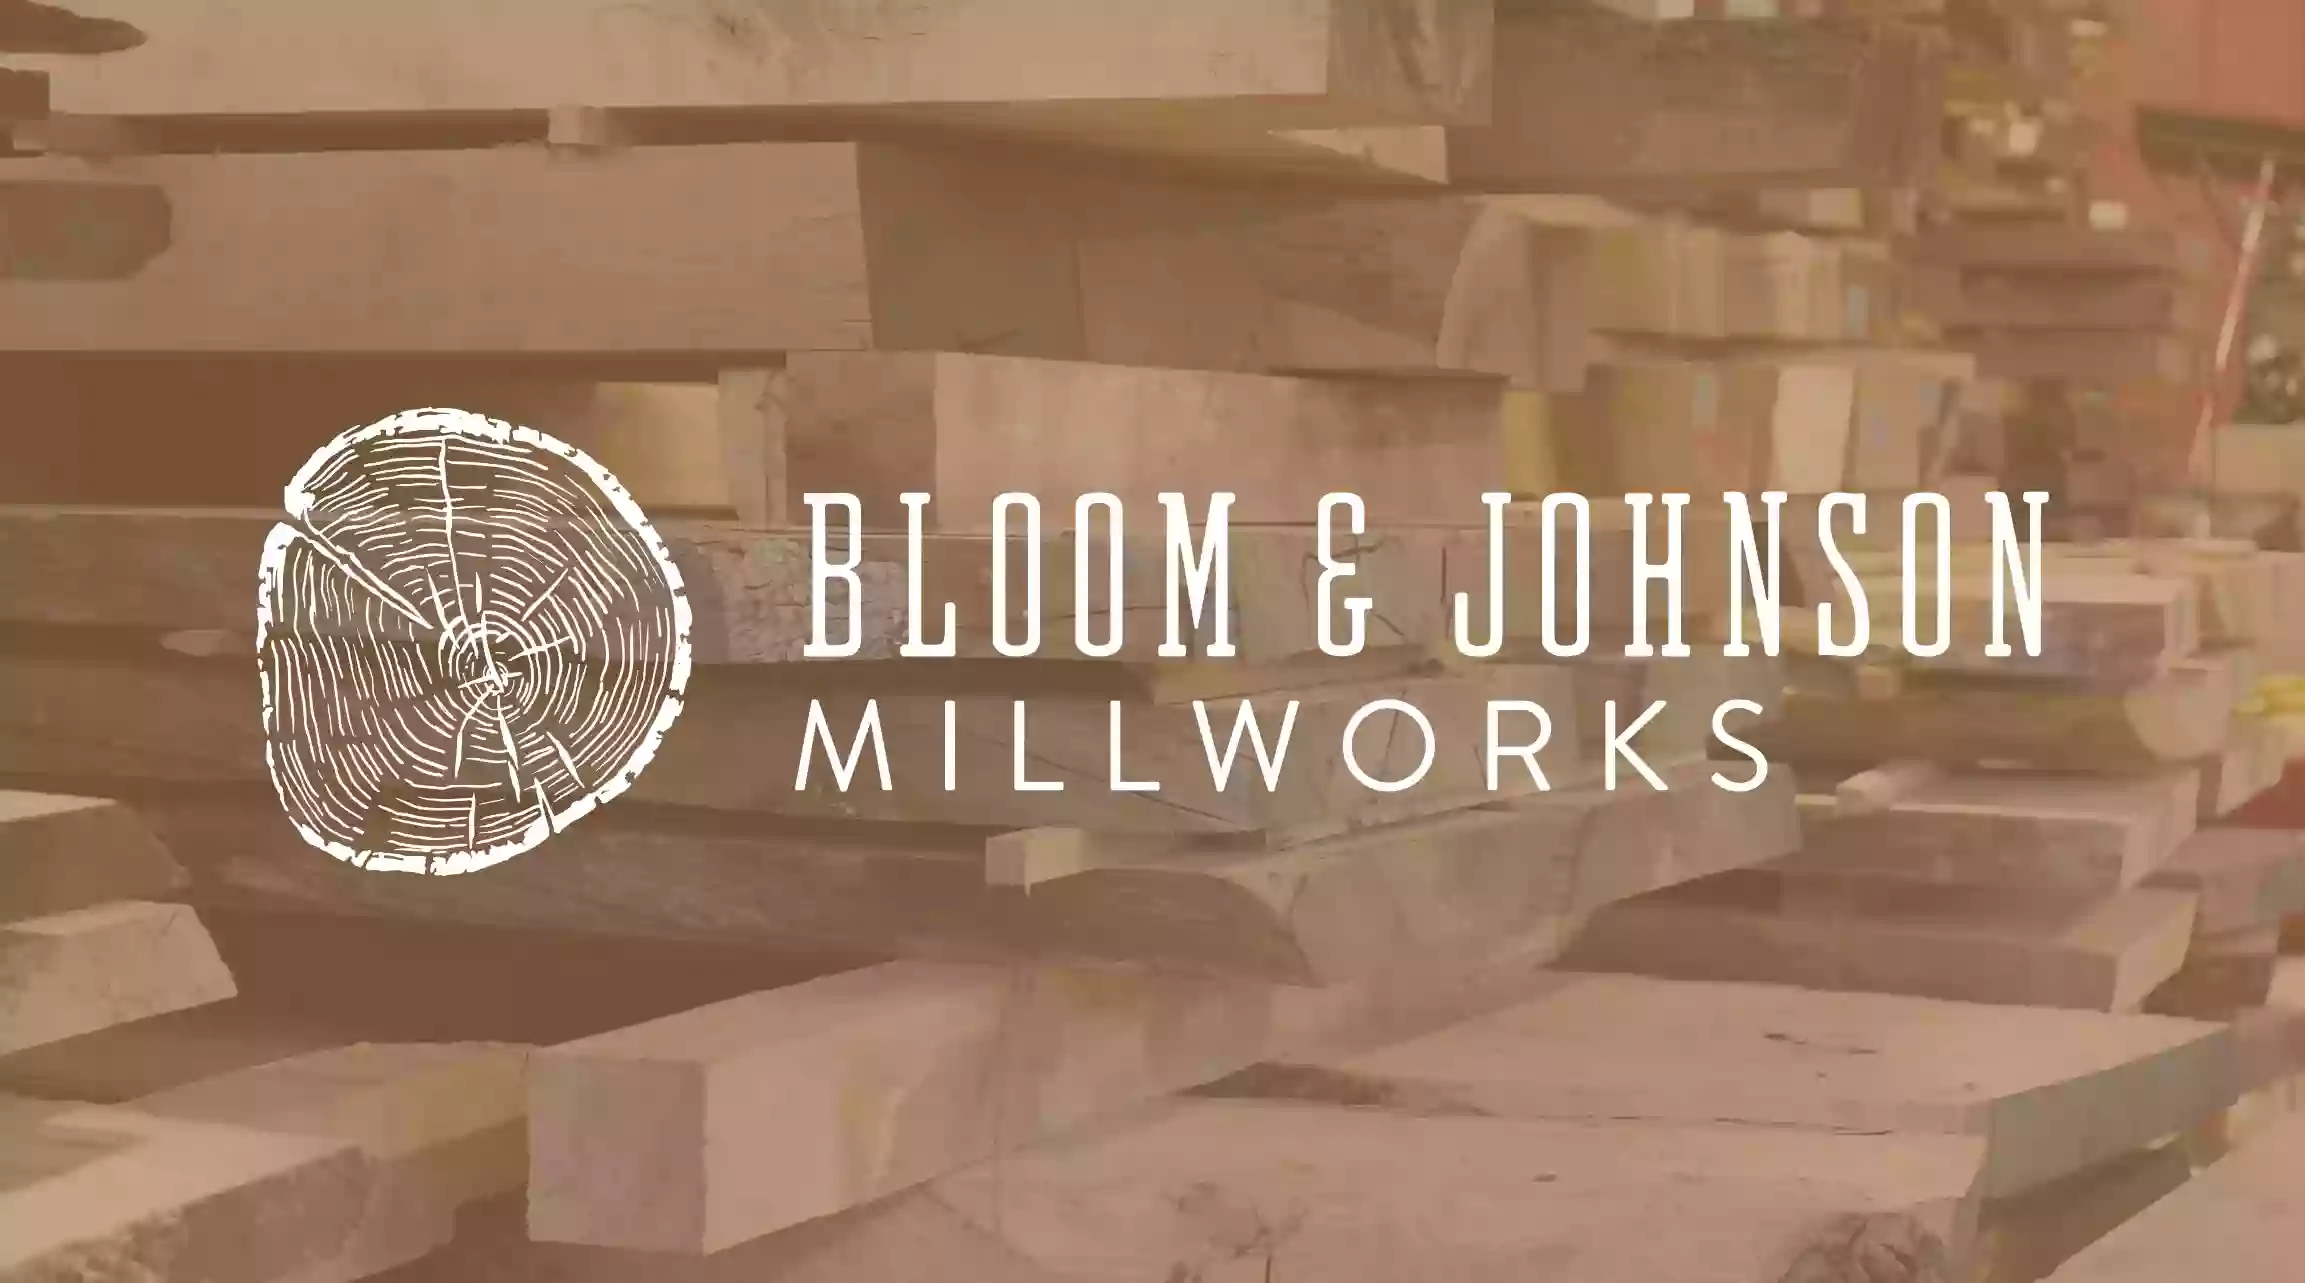 Bloom and Johnson Millworks